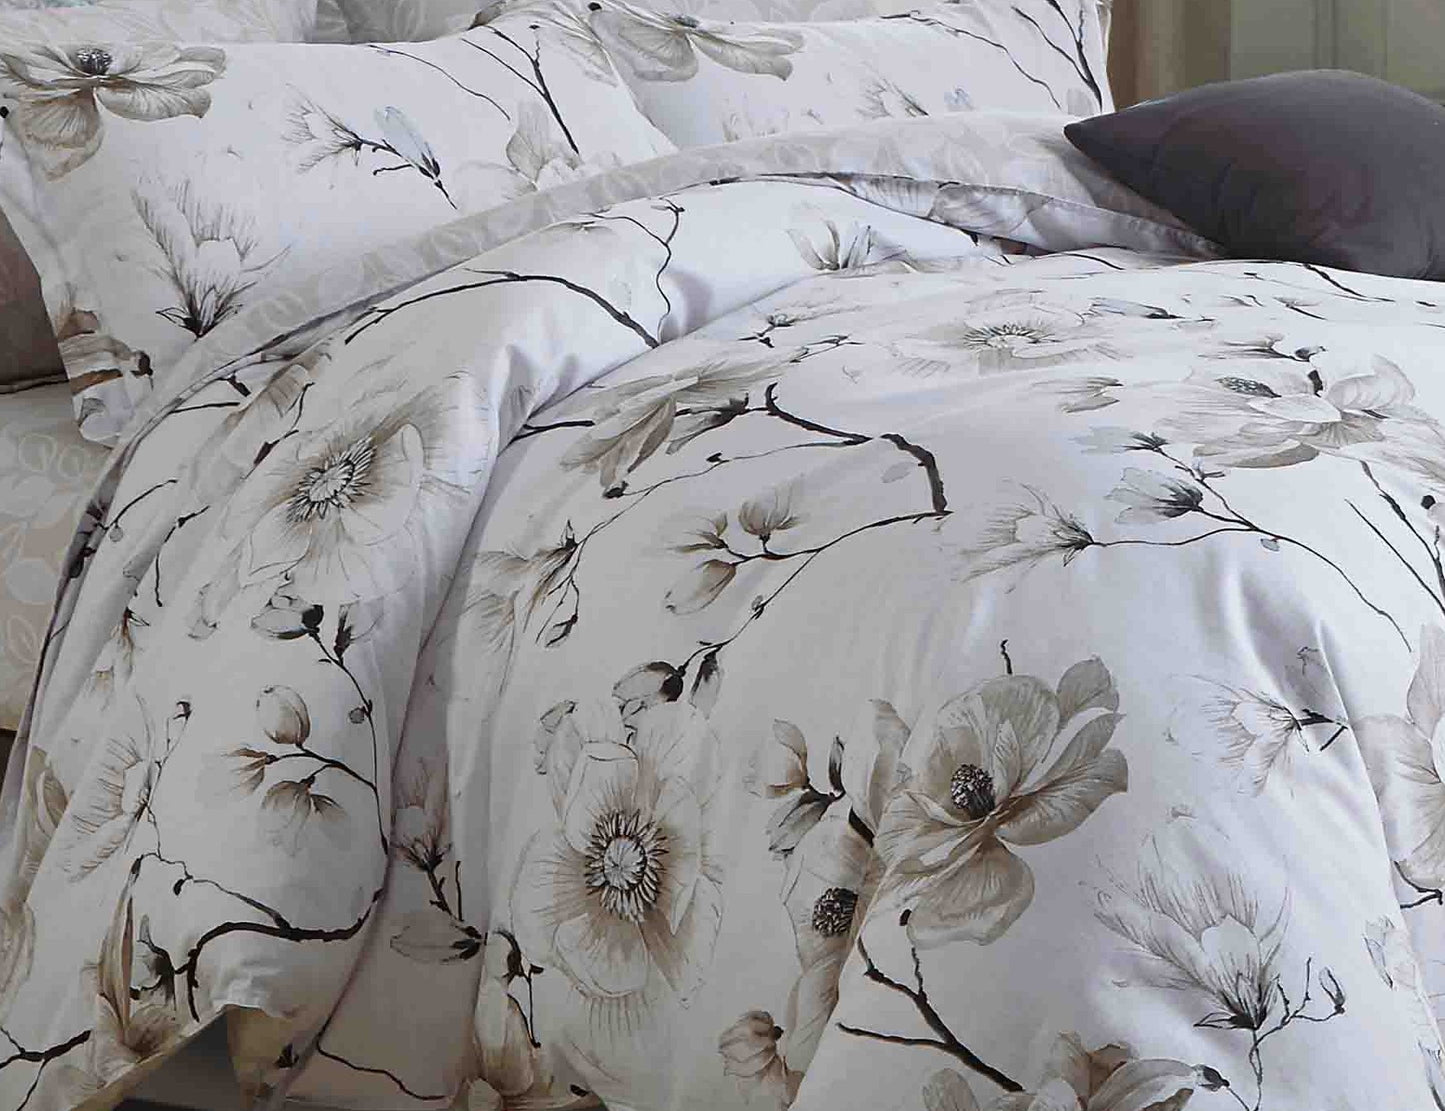 Juan Brown and White Floral 100% Cotton Comforter Set